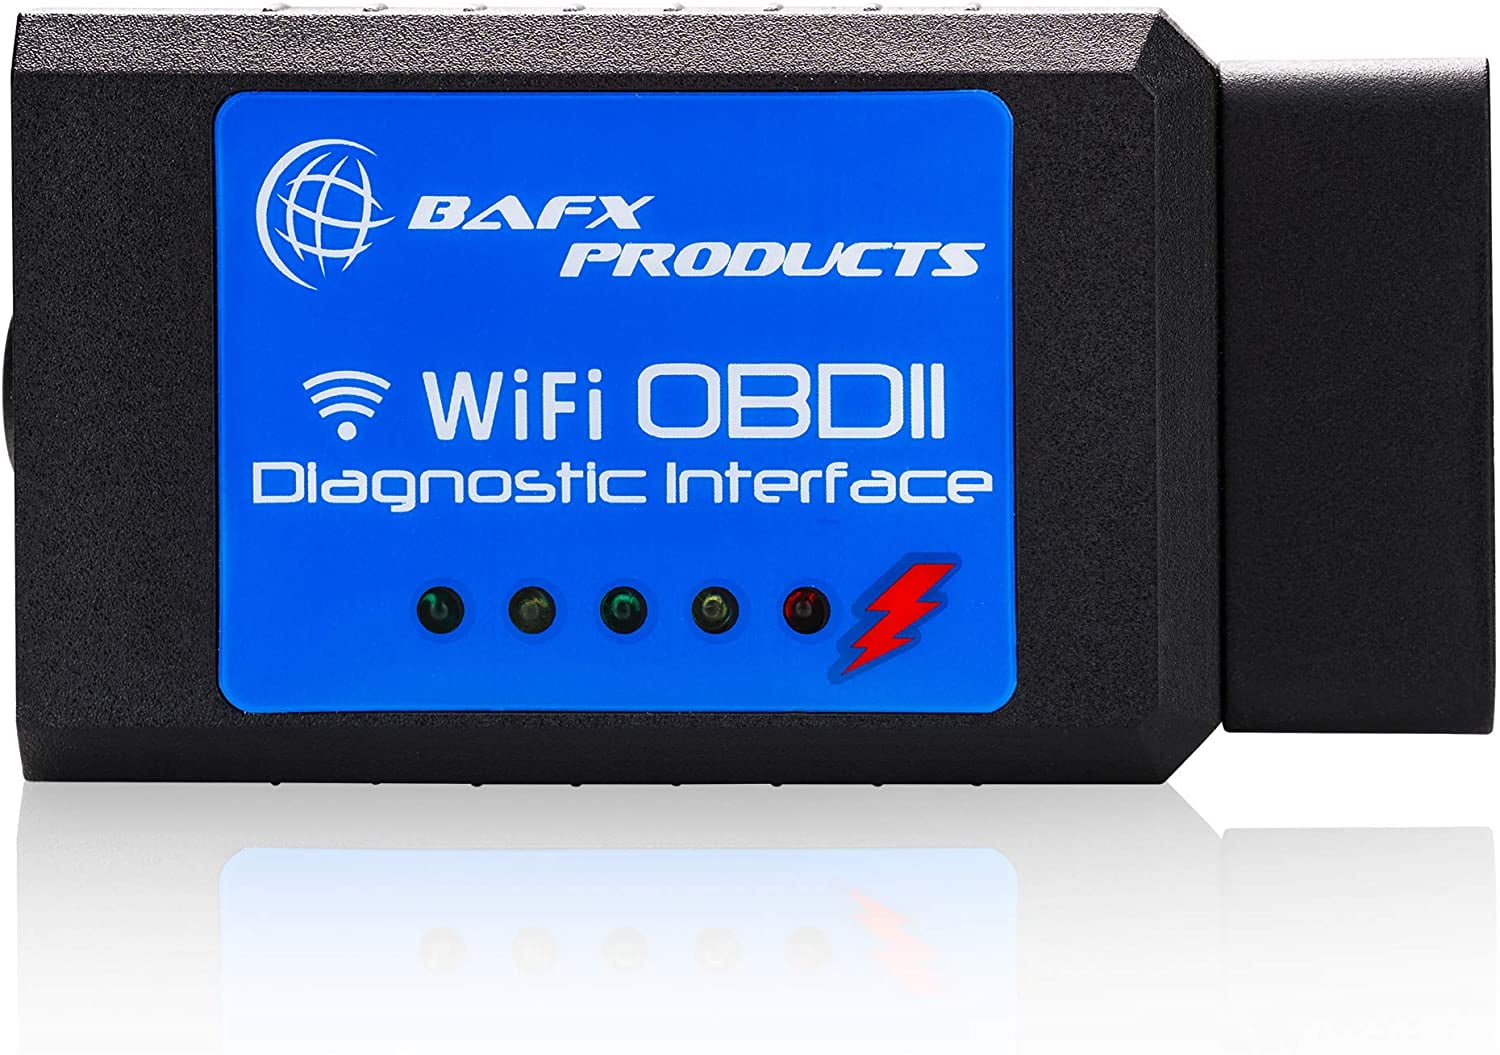 BAFX Products WiFi OBDII Reader Scanner for iOS Devices